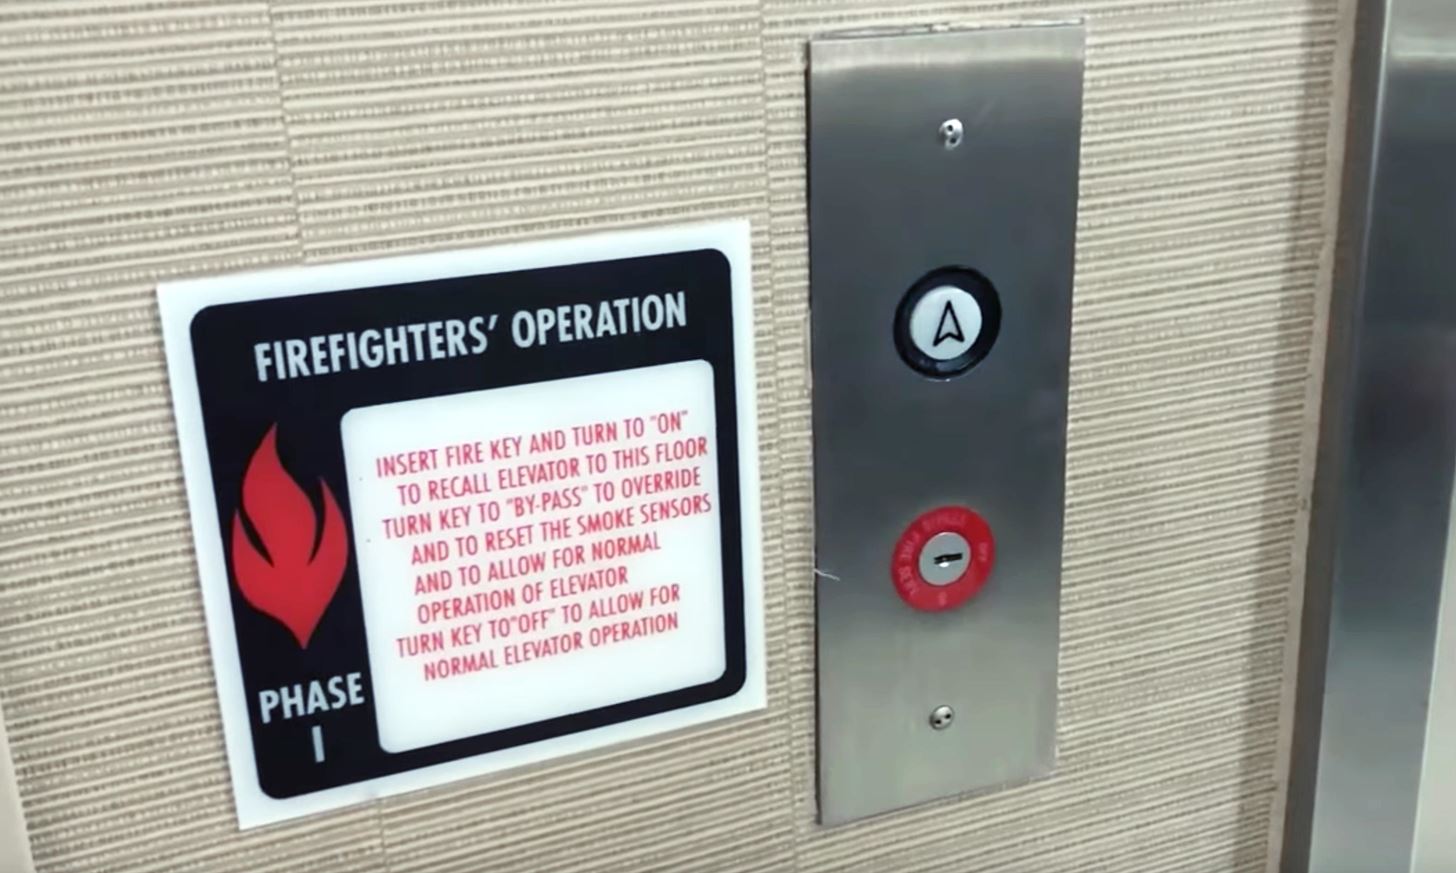 Hacking Elevators How To Bypass Access Control Systems To Visit Locked Floors Restricted Levels In Any Building Null Byte Wonderhowto